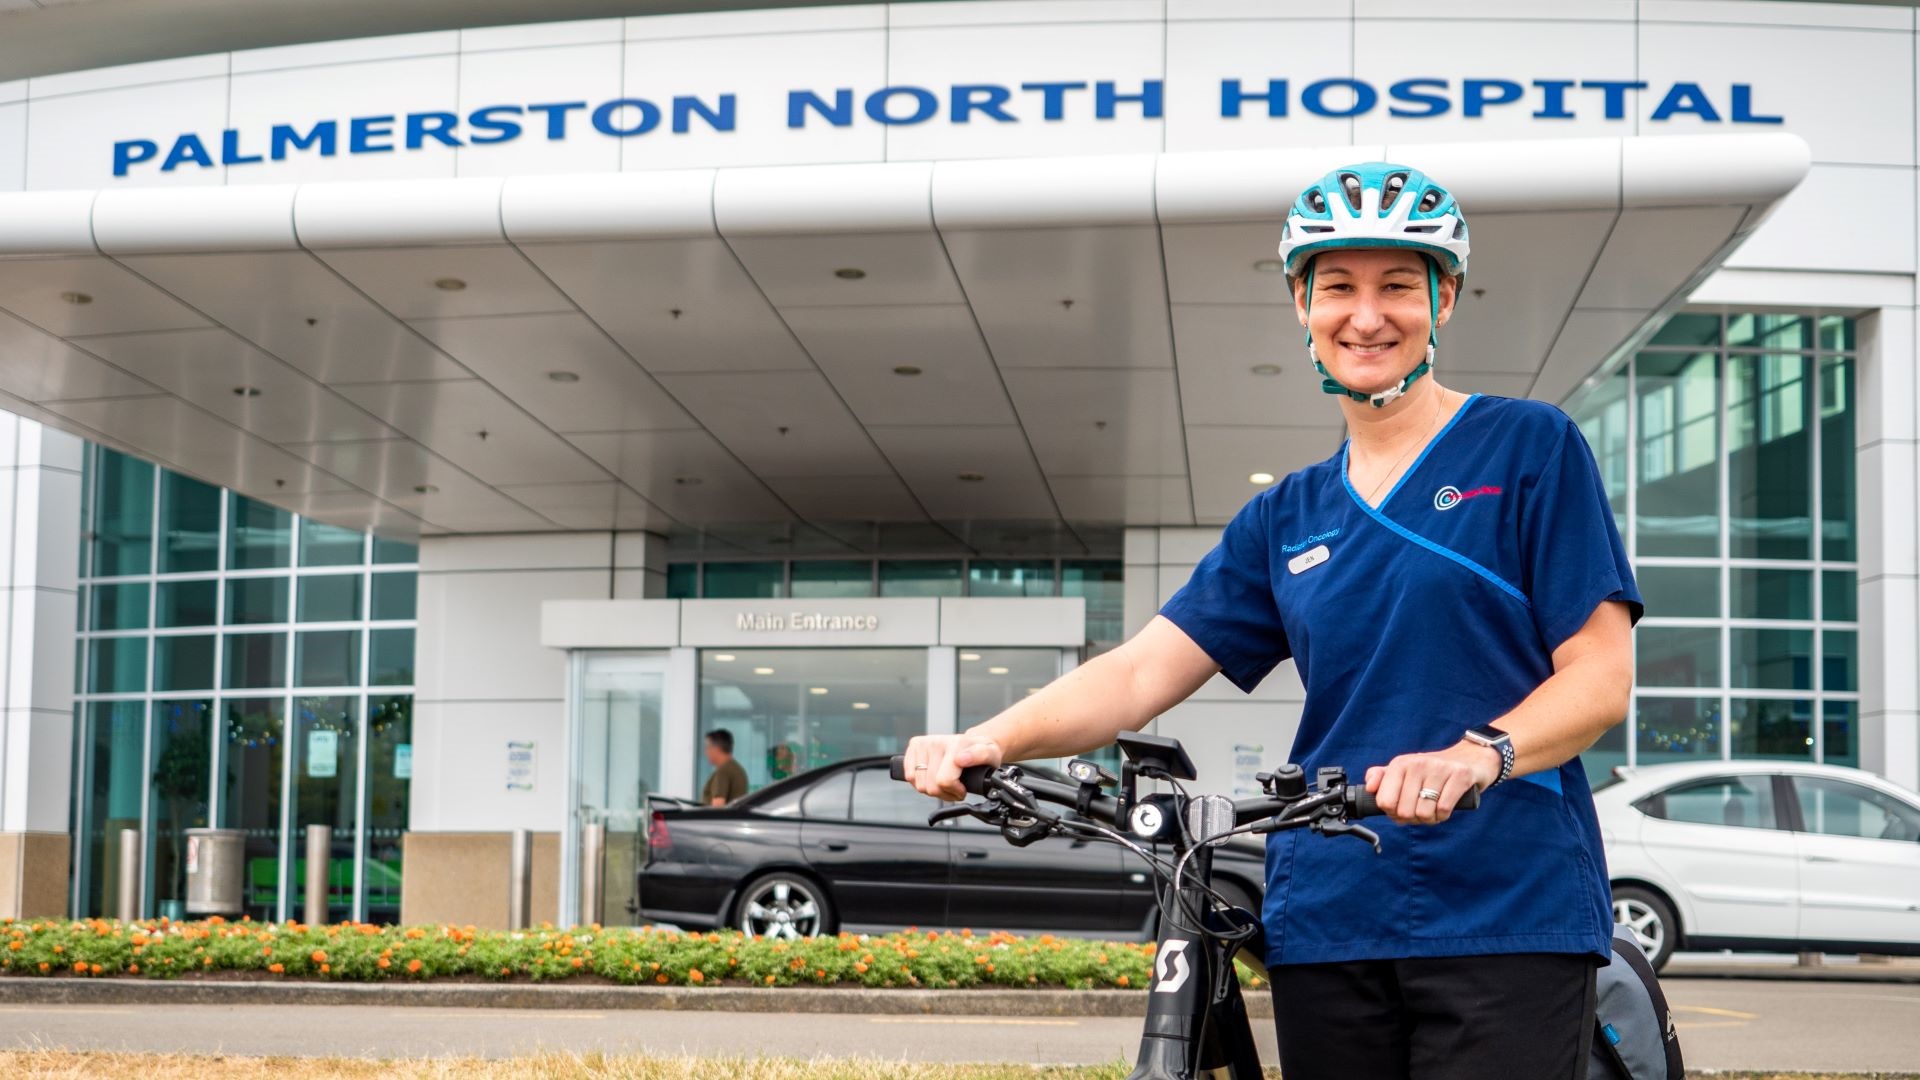 Photo shows smiling woman in hospital scrubs and bike helmet standing next to her bike outside the main entrance of Palmerston North Hospital.